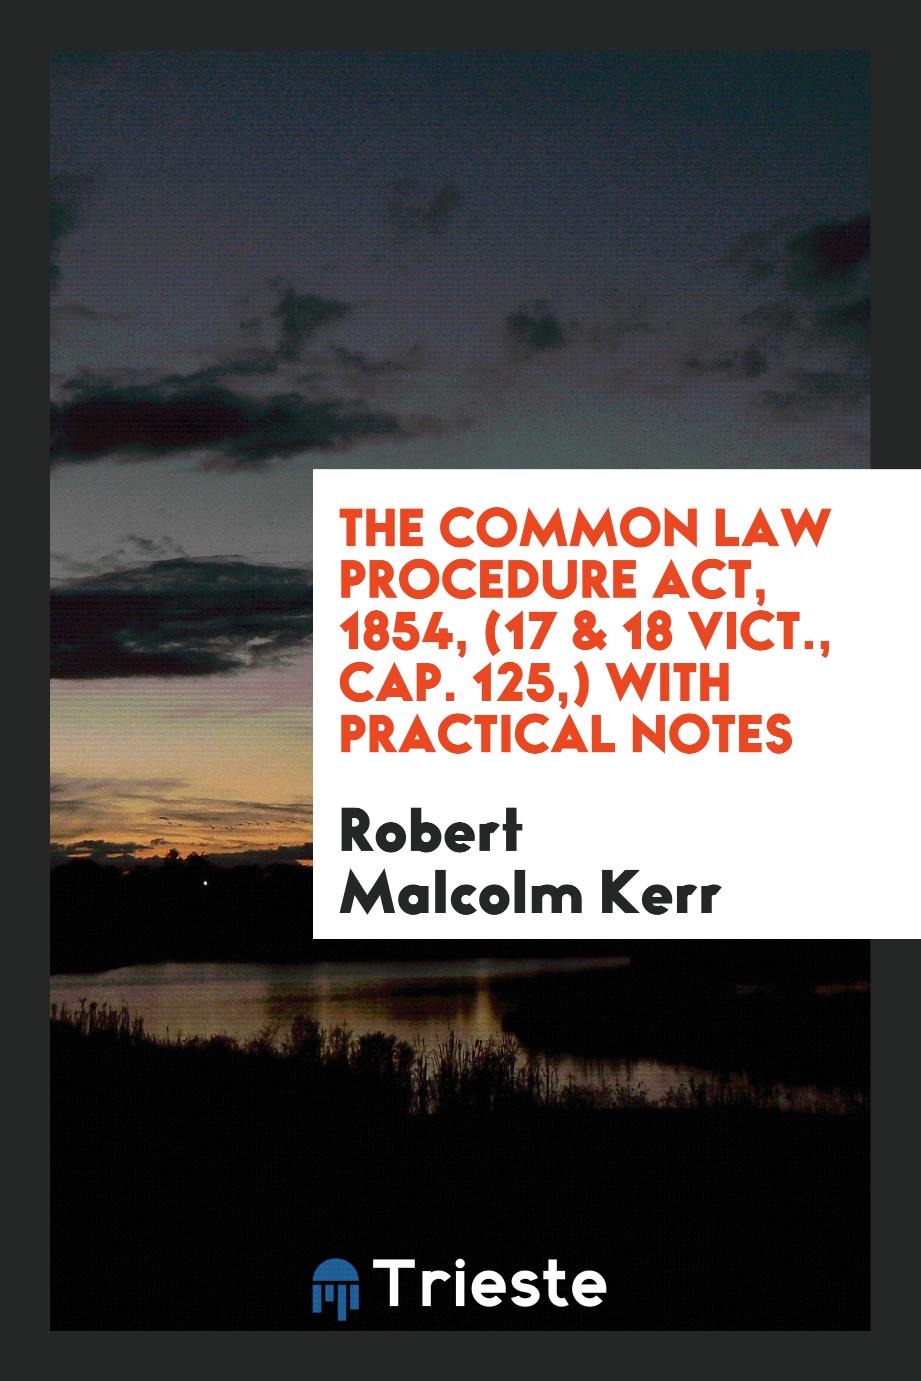 The Common Law Procedure Act, 1854, (17 & 18 Vict., Cap. 125,) with Practical Notes